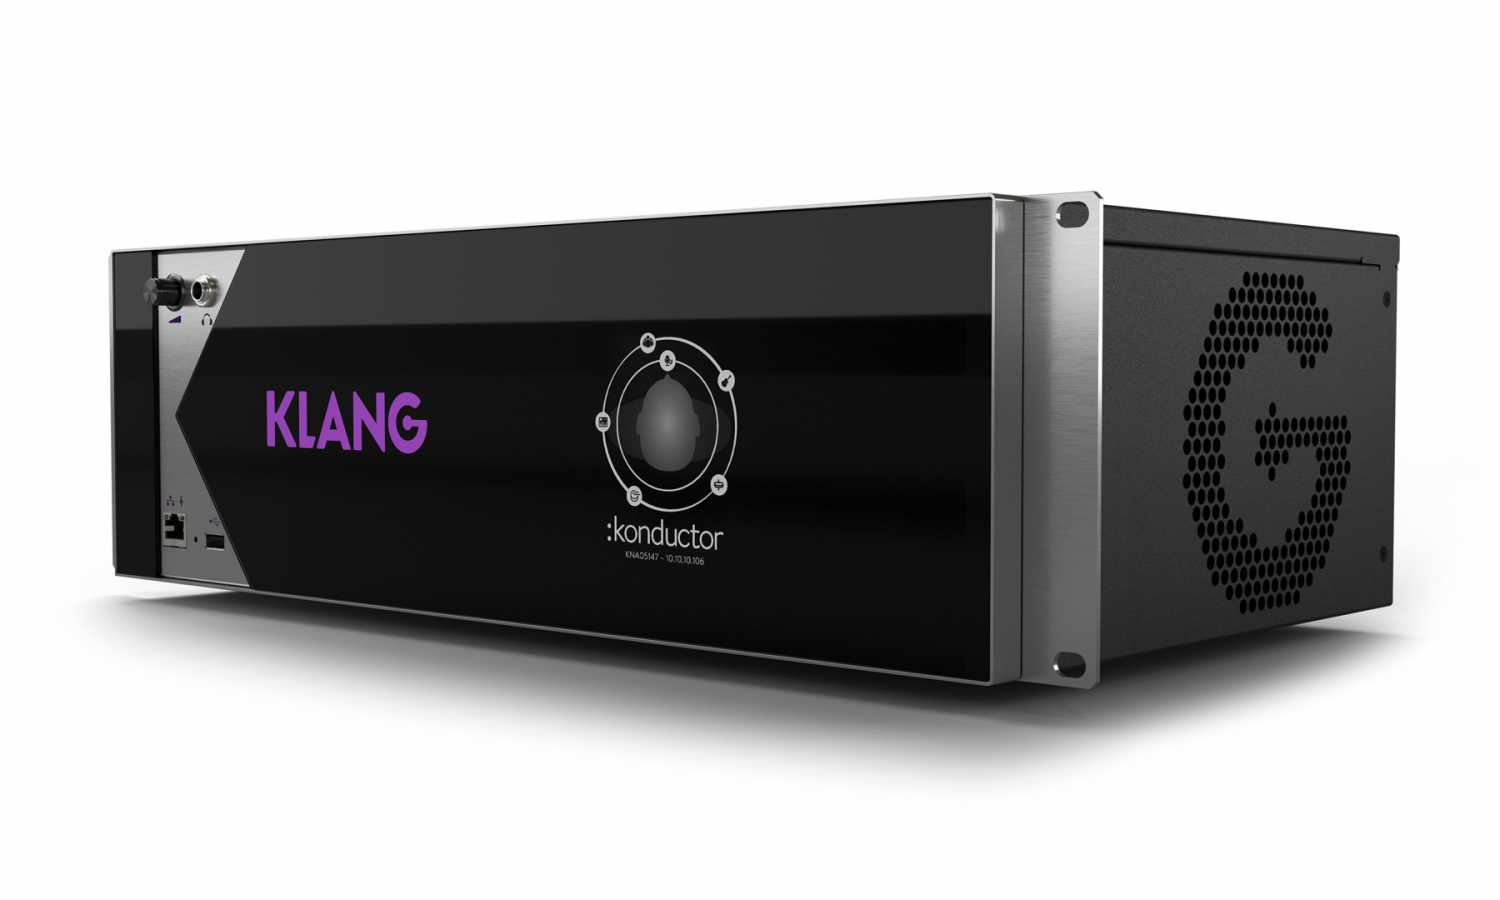 See the KLANG:konductor on stand G11 at the PLASA Show